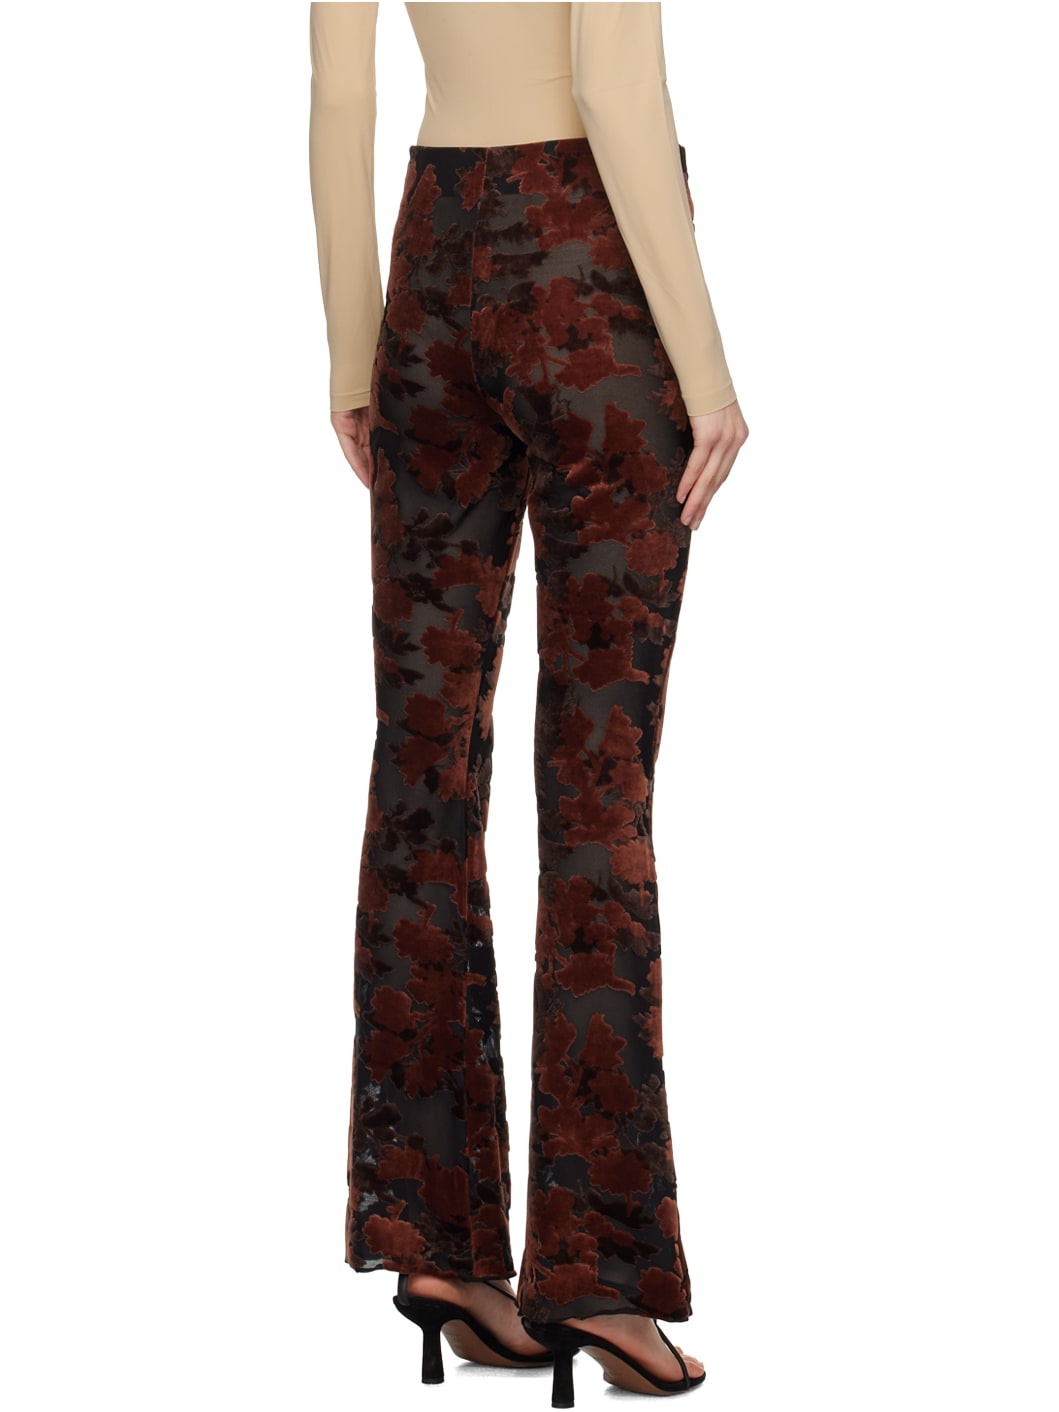 Brown & Black Gilly Devore Trousers - 3